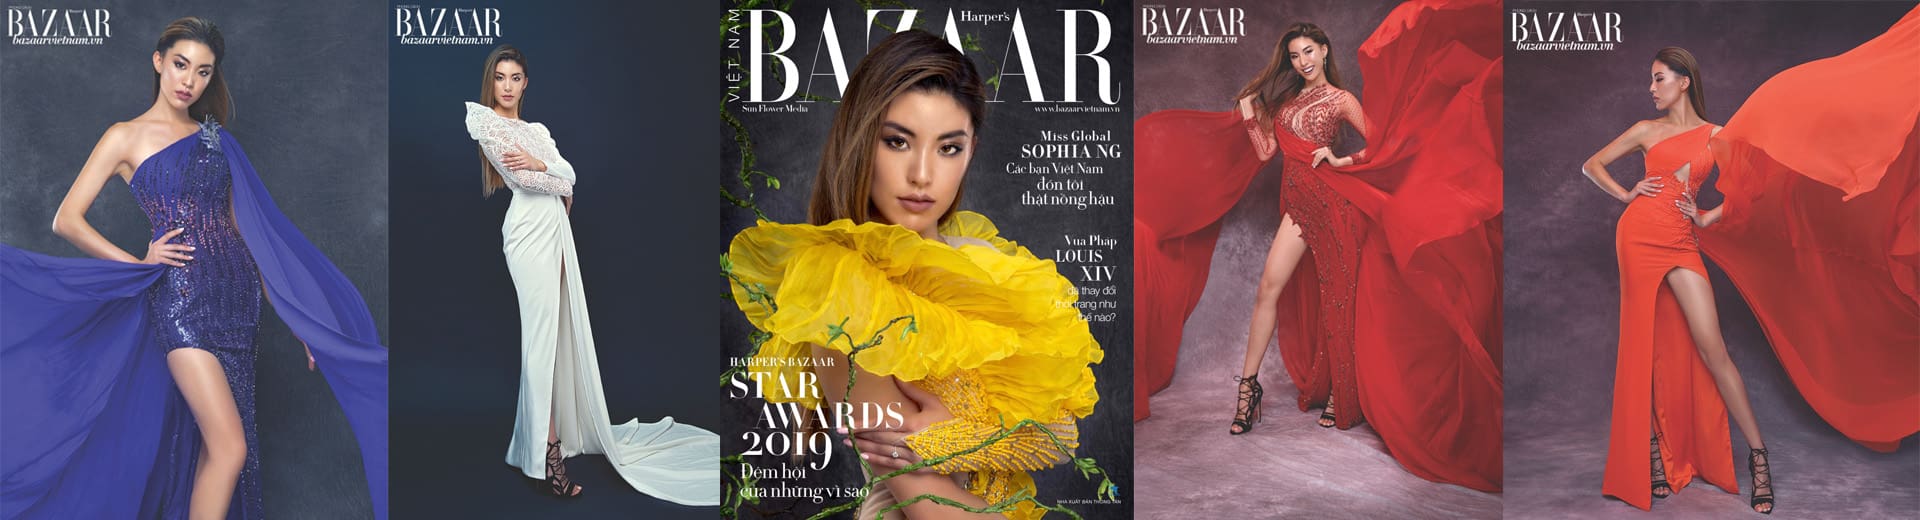 Five fashion magazine covers featuring diverse women in elegant dresses, each posing dramatically against simple backgrounds.